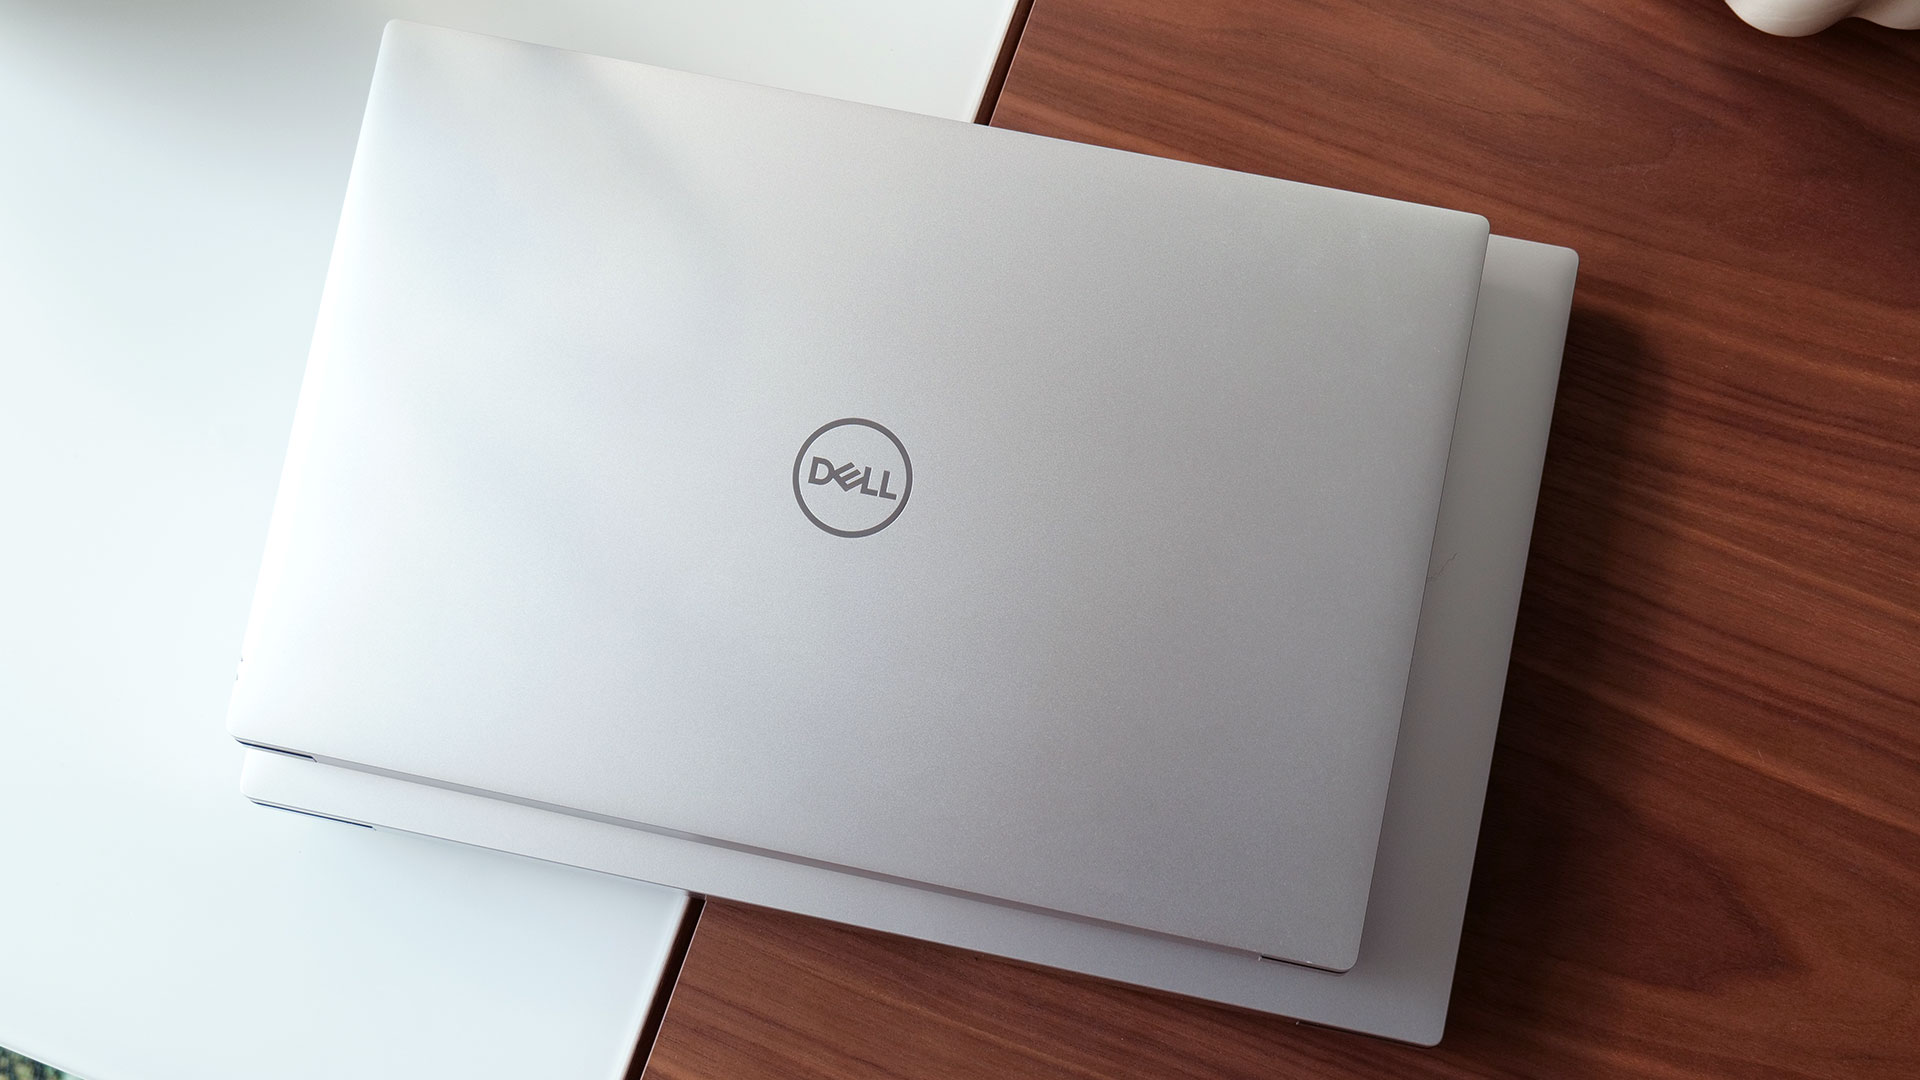 Here is an XPS 15 laid on top of an XPS 17 to give you a sense of their size.  (Photo: Sam Rutherford)